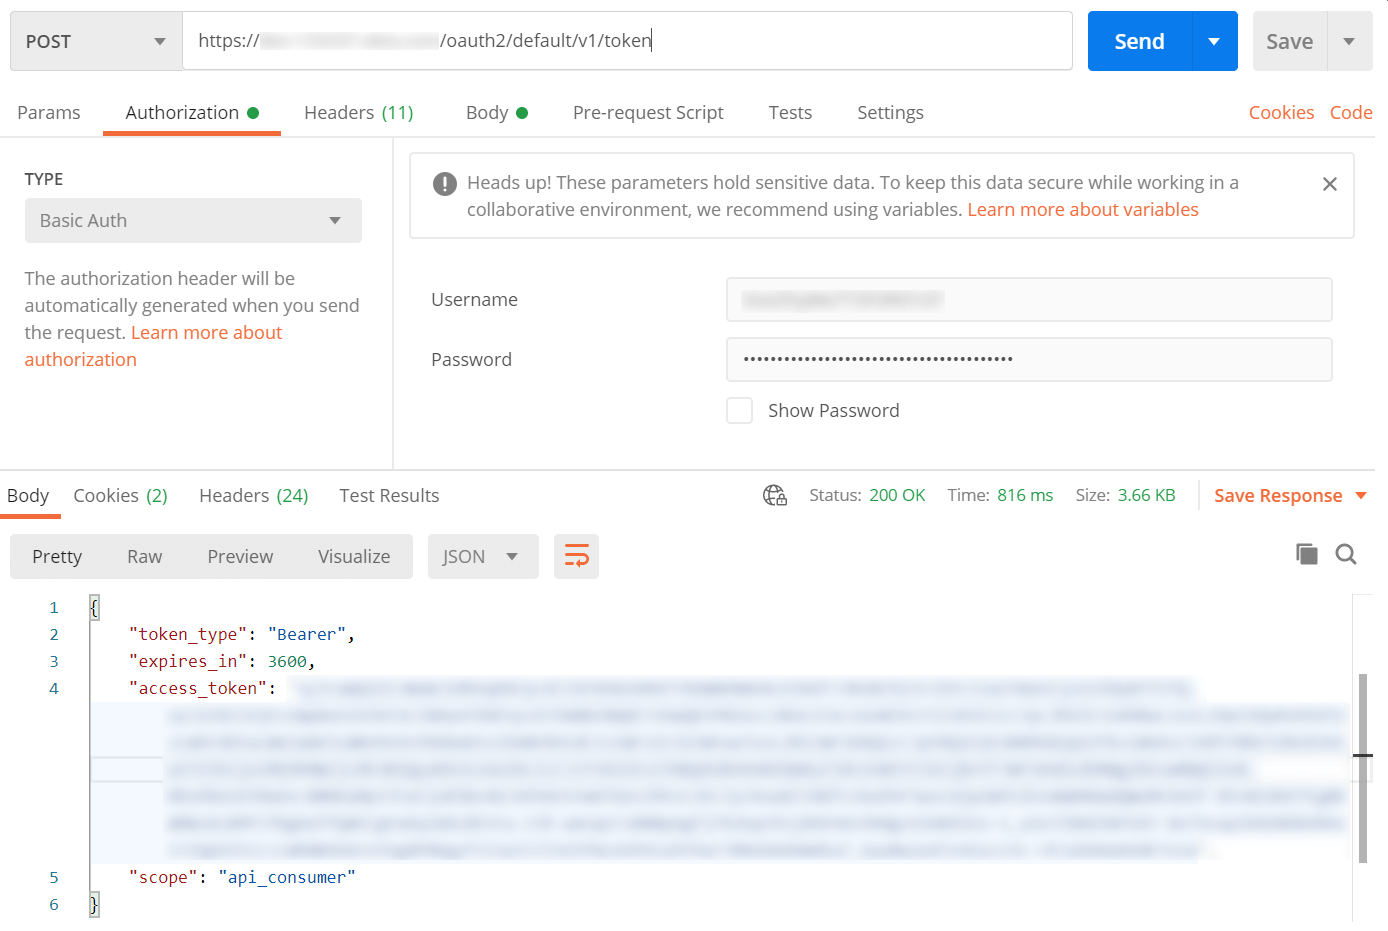 Postman showing a token request post response including an access token